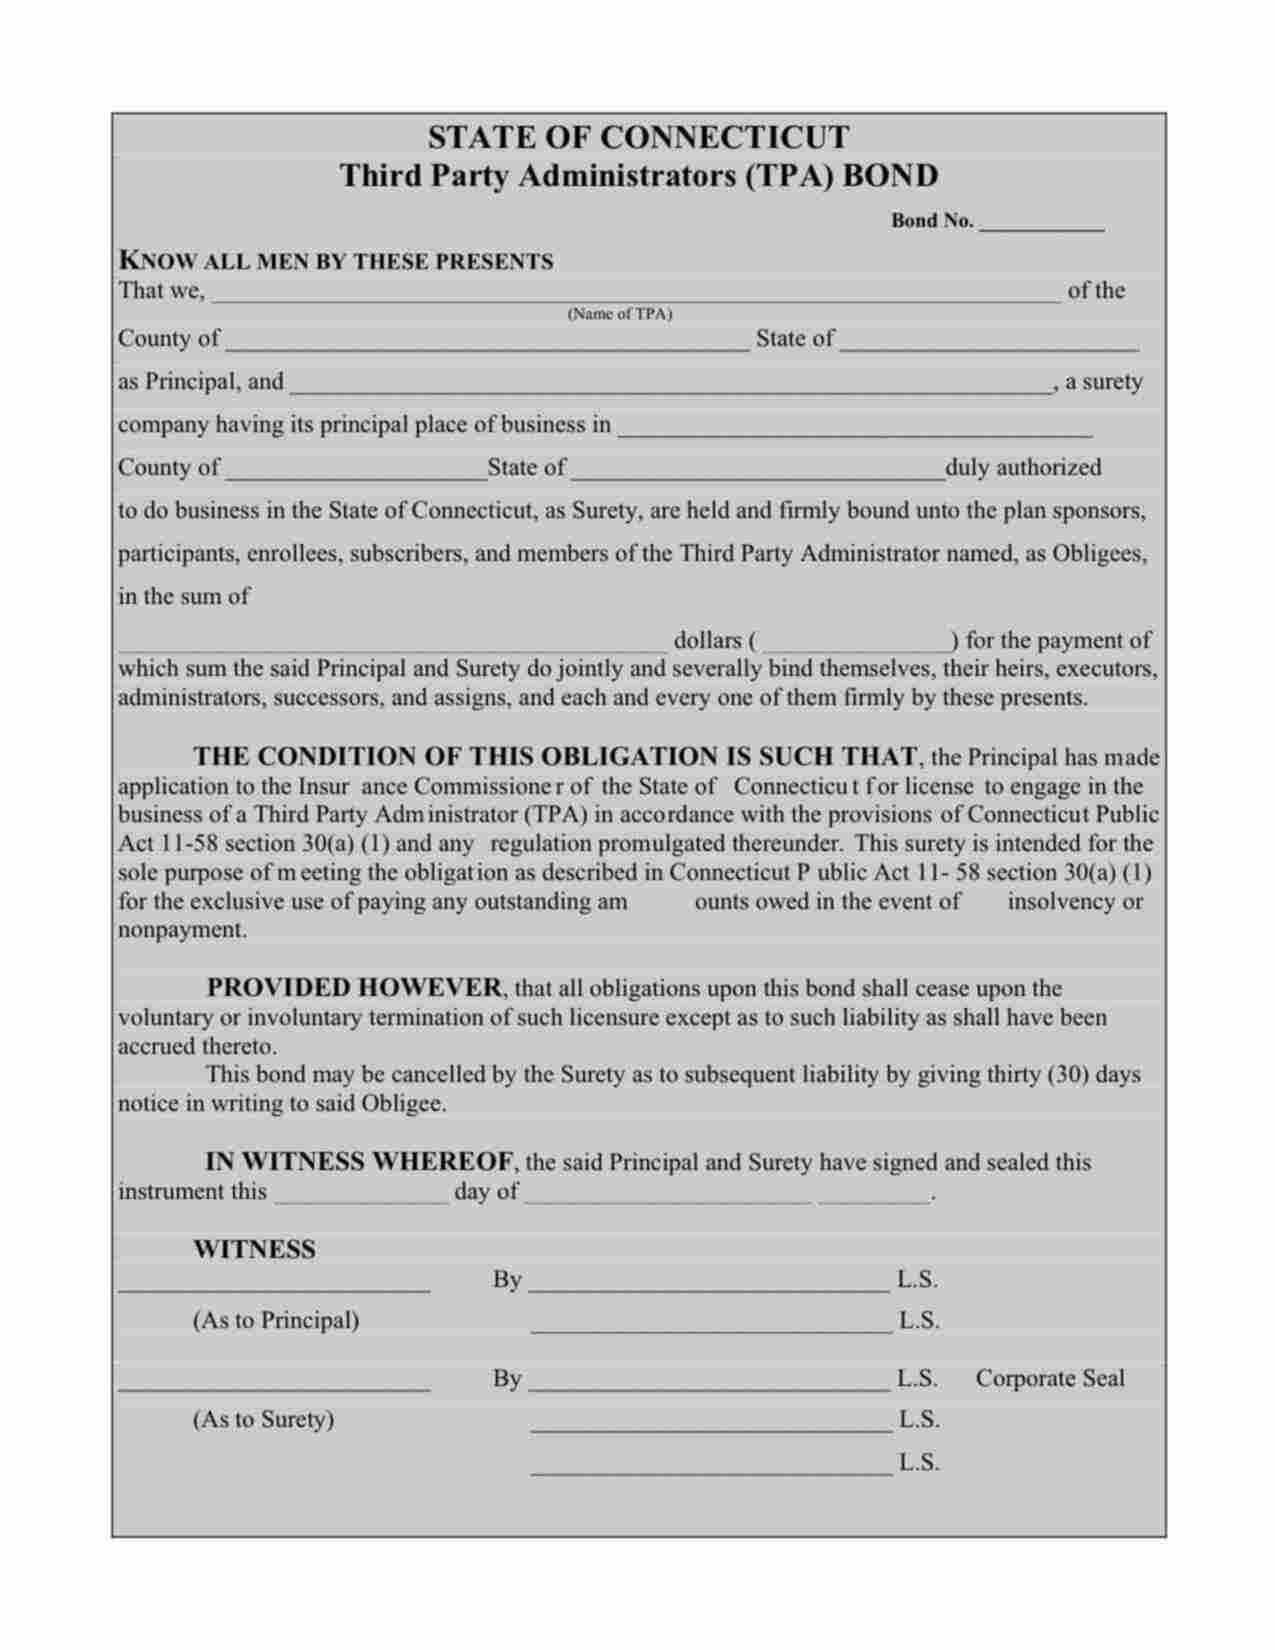 Connecticut Third Party Administrator Bond Form